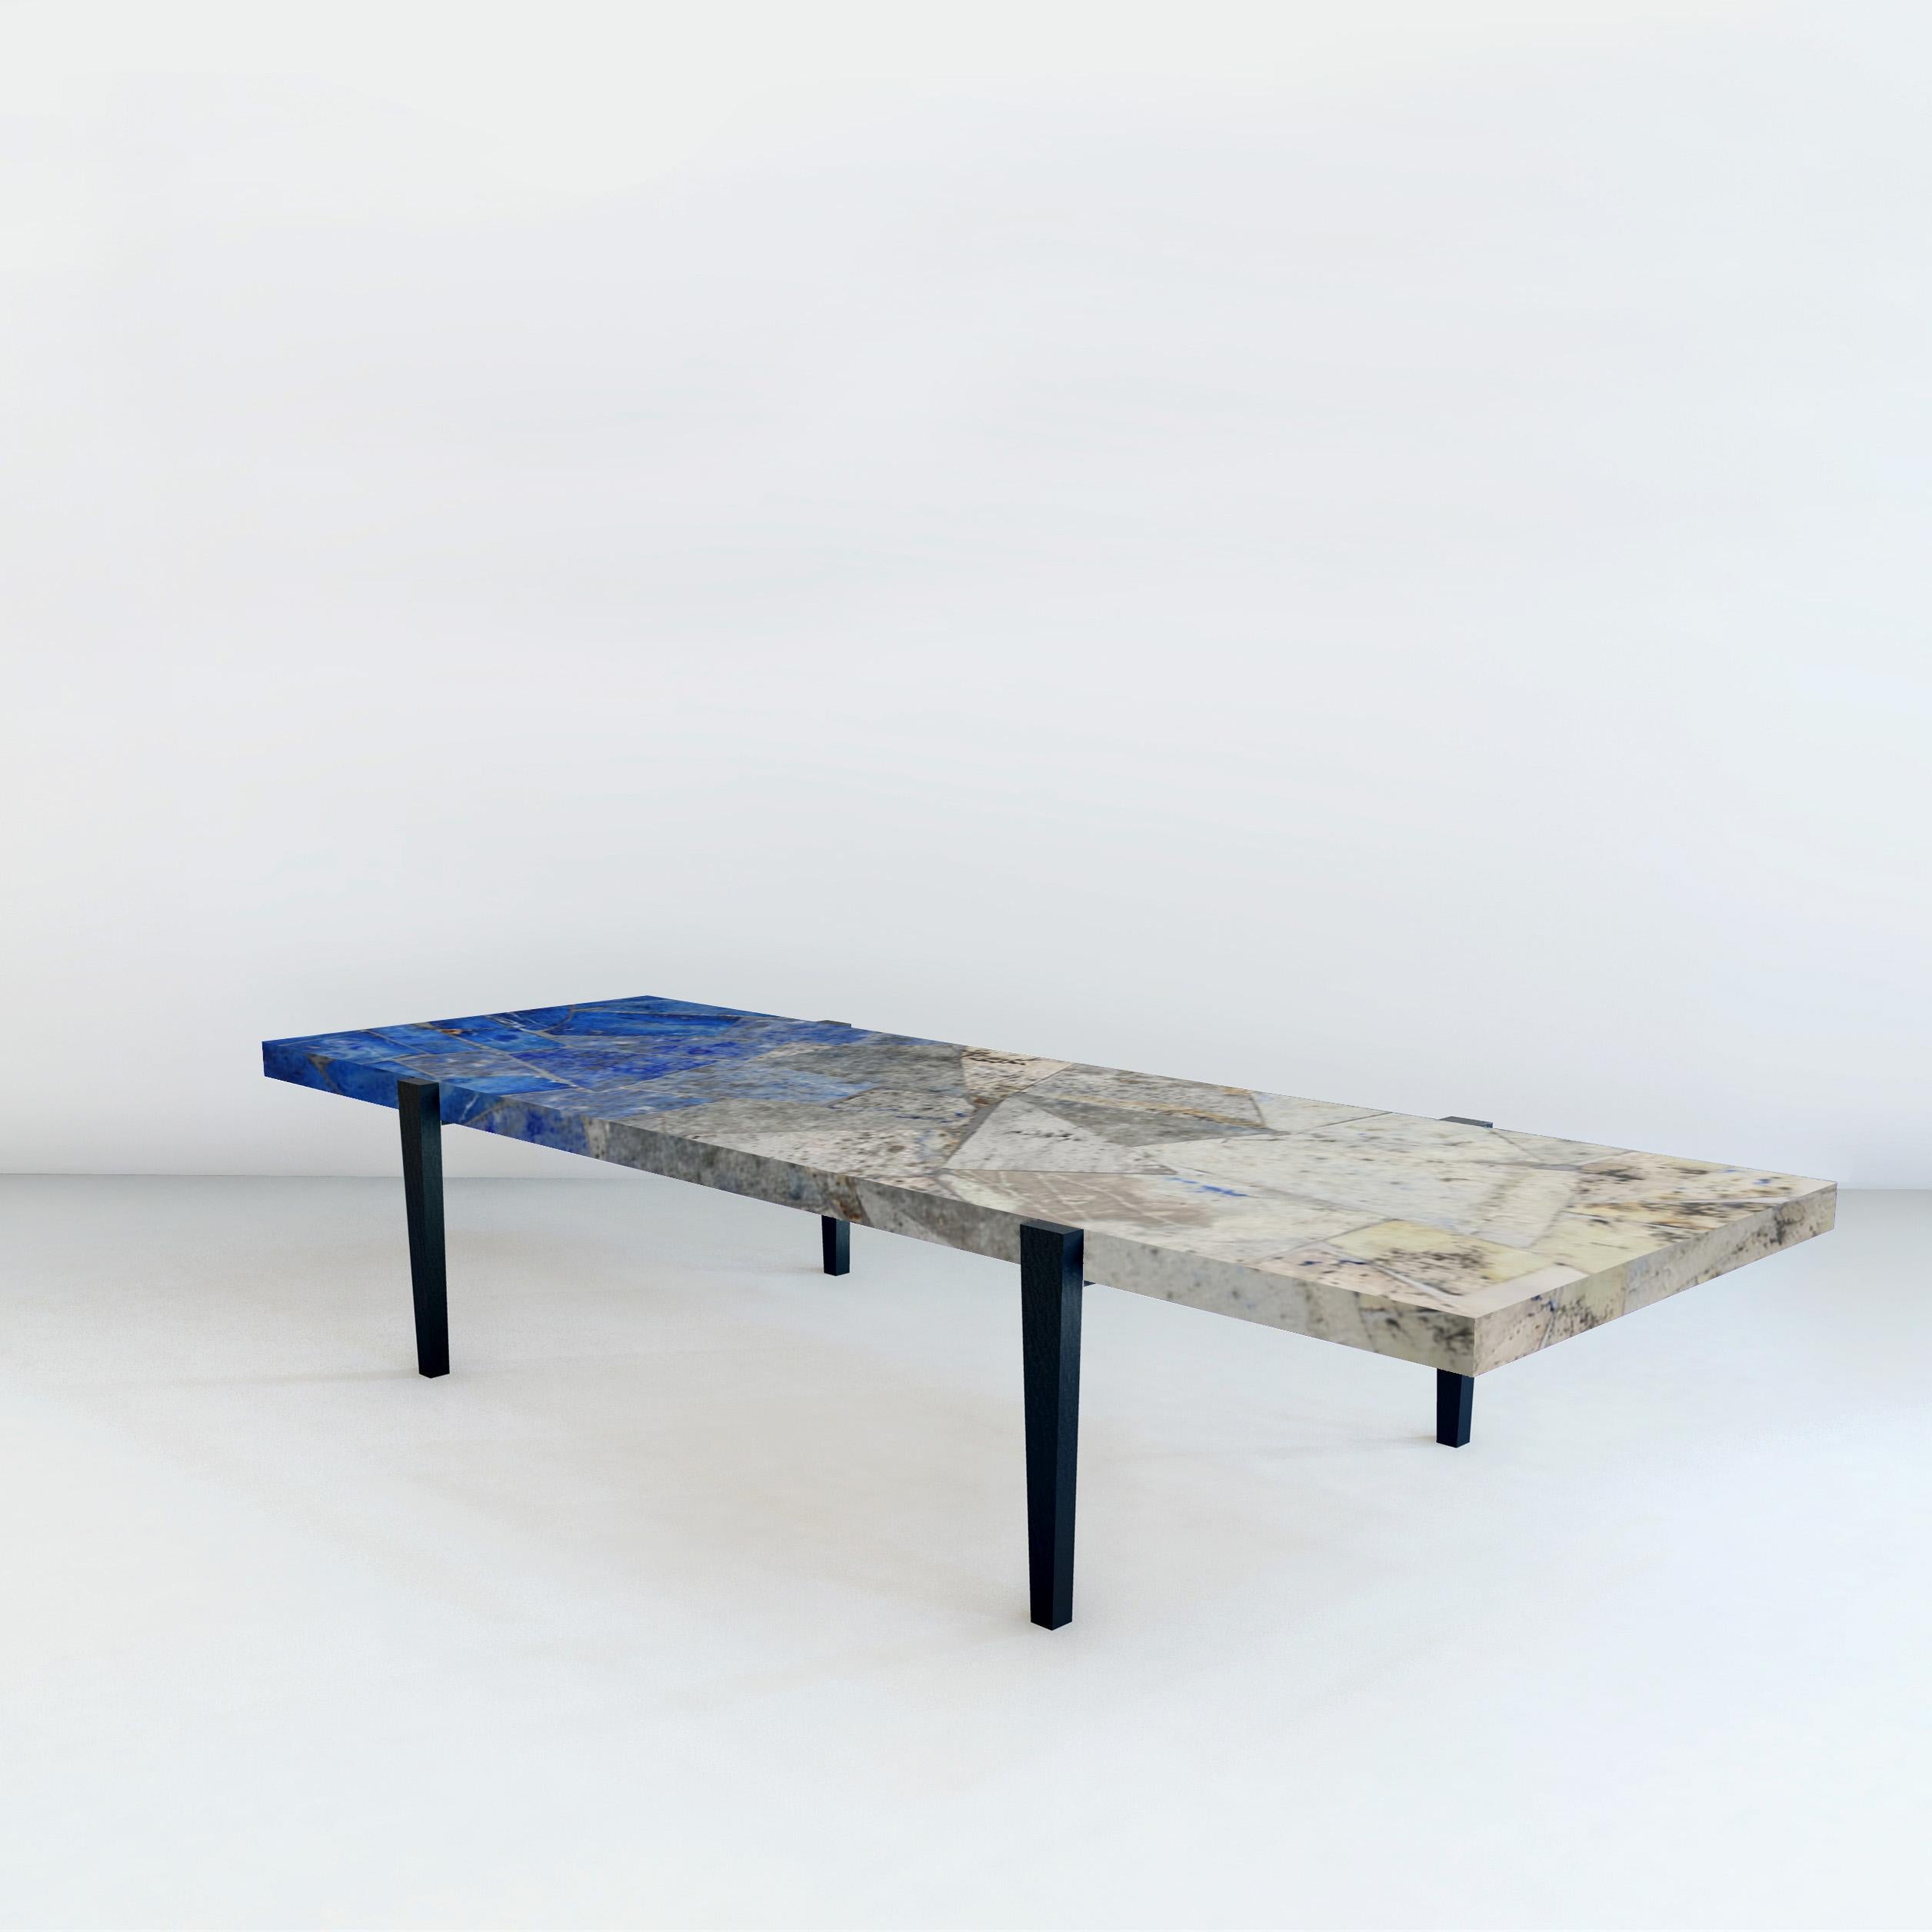 Topaa'nga II table by Studio Lel
Dimensions: W 183 x D 61 x H 35.5 cm
Materials: Lapis Lazuli, Granite, Metal

These are handmade from semiprecious stone and marble in a small artisanal workshop. Please note that variations and slight